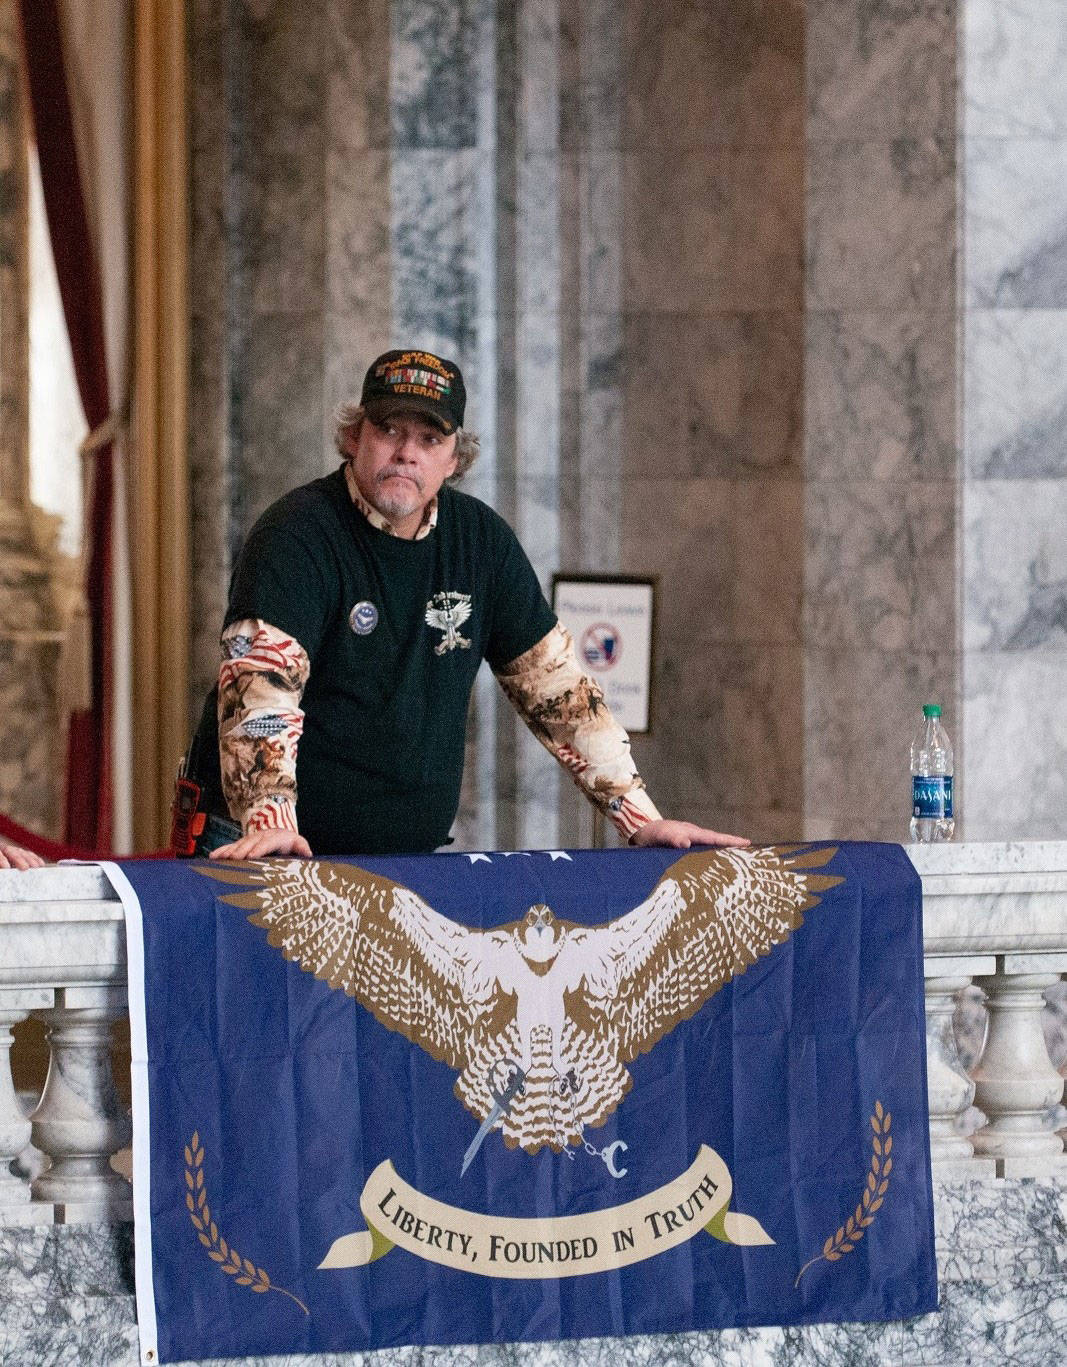 Robert Brown, an advocate for splitting the state of Washington into two, at a rally at the Capitol in Olympia last week. Photo by Sean Harding, WNPA Olympia News Bureau